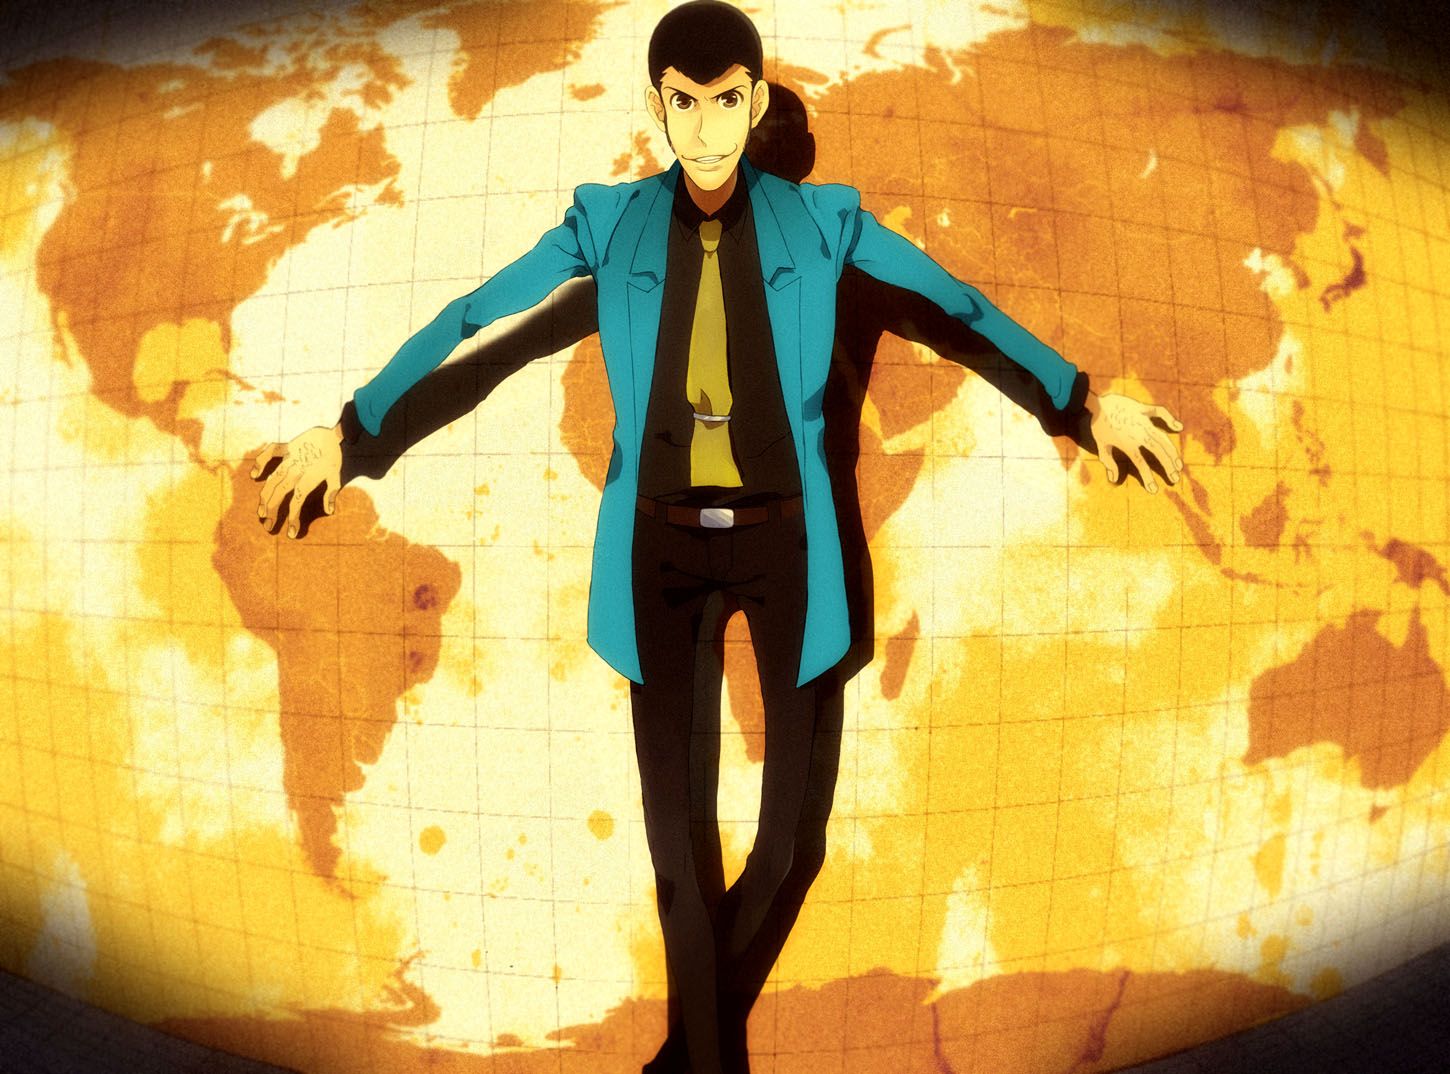 Lupin The 3rd #3